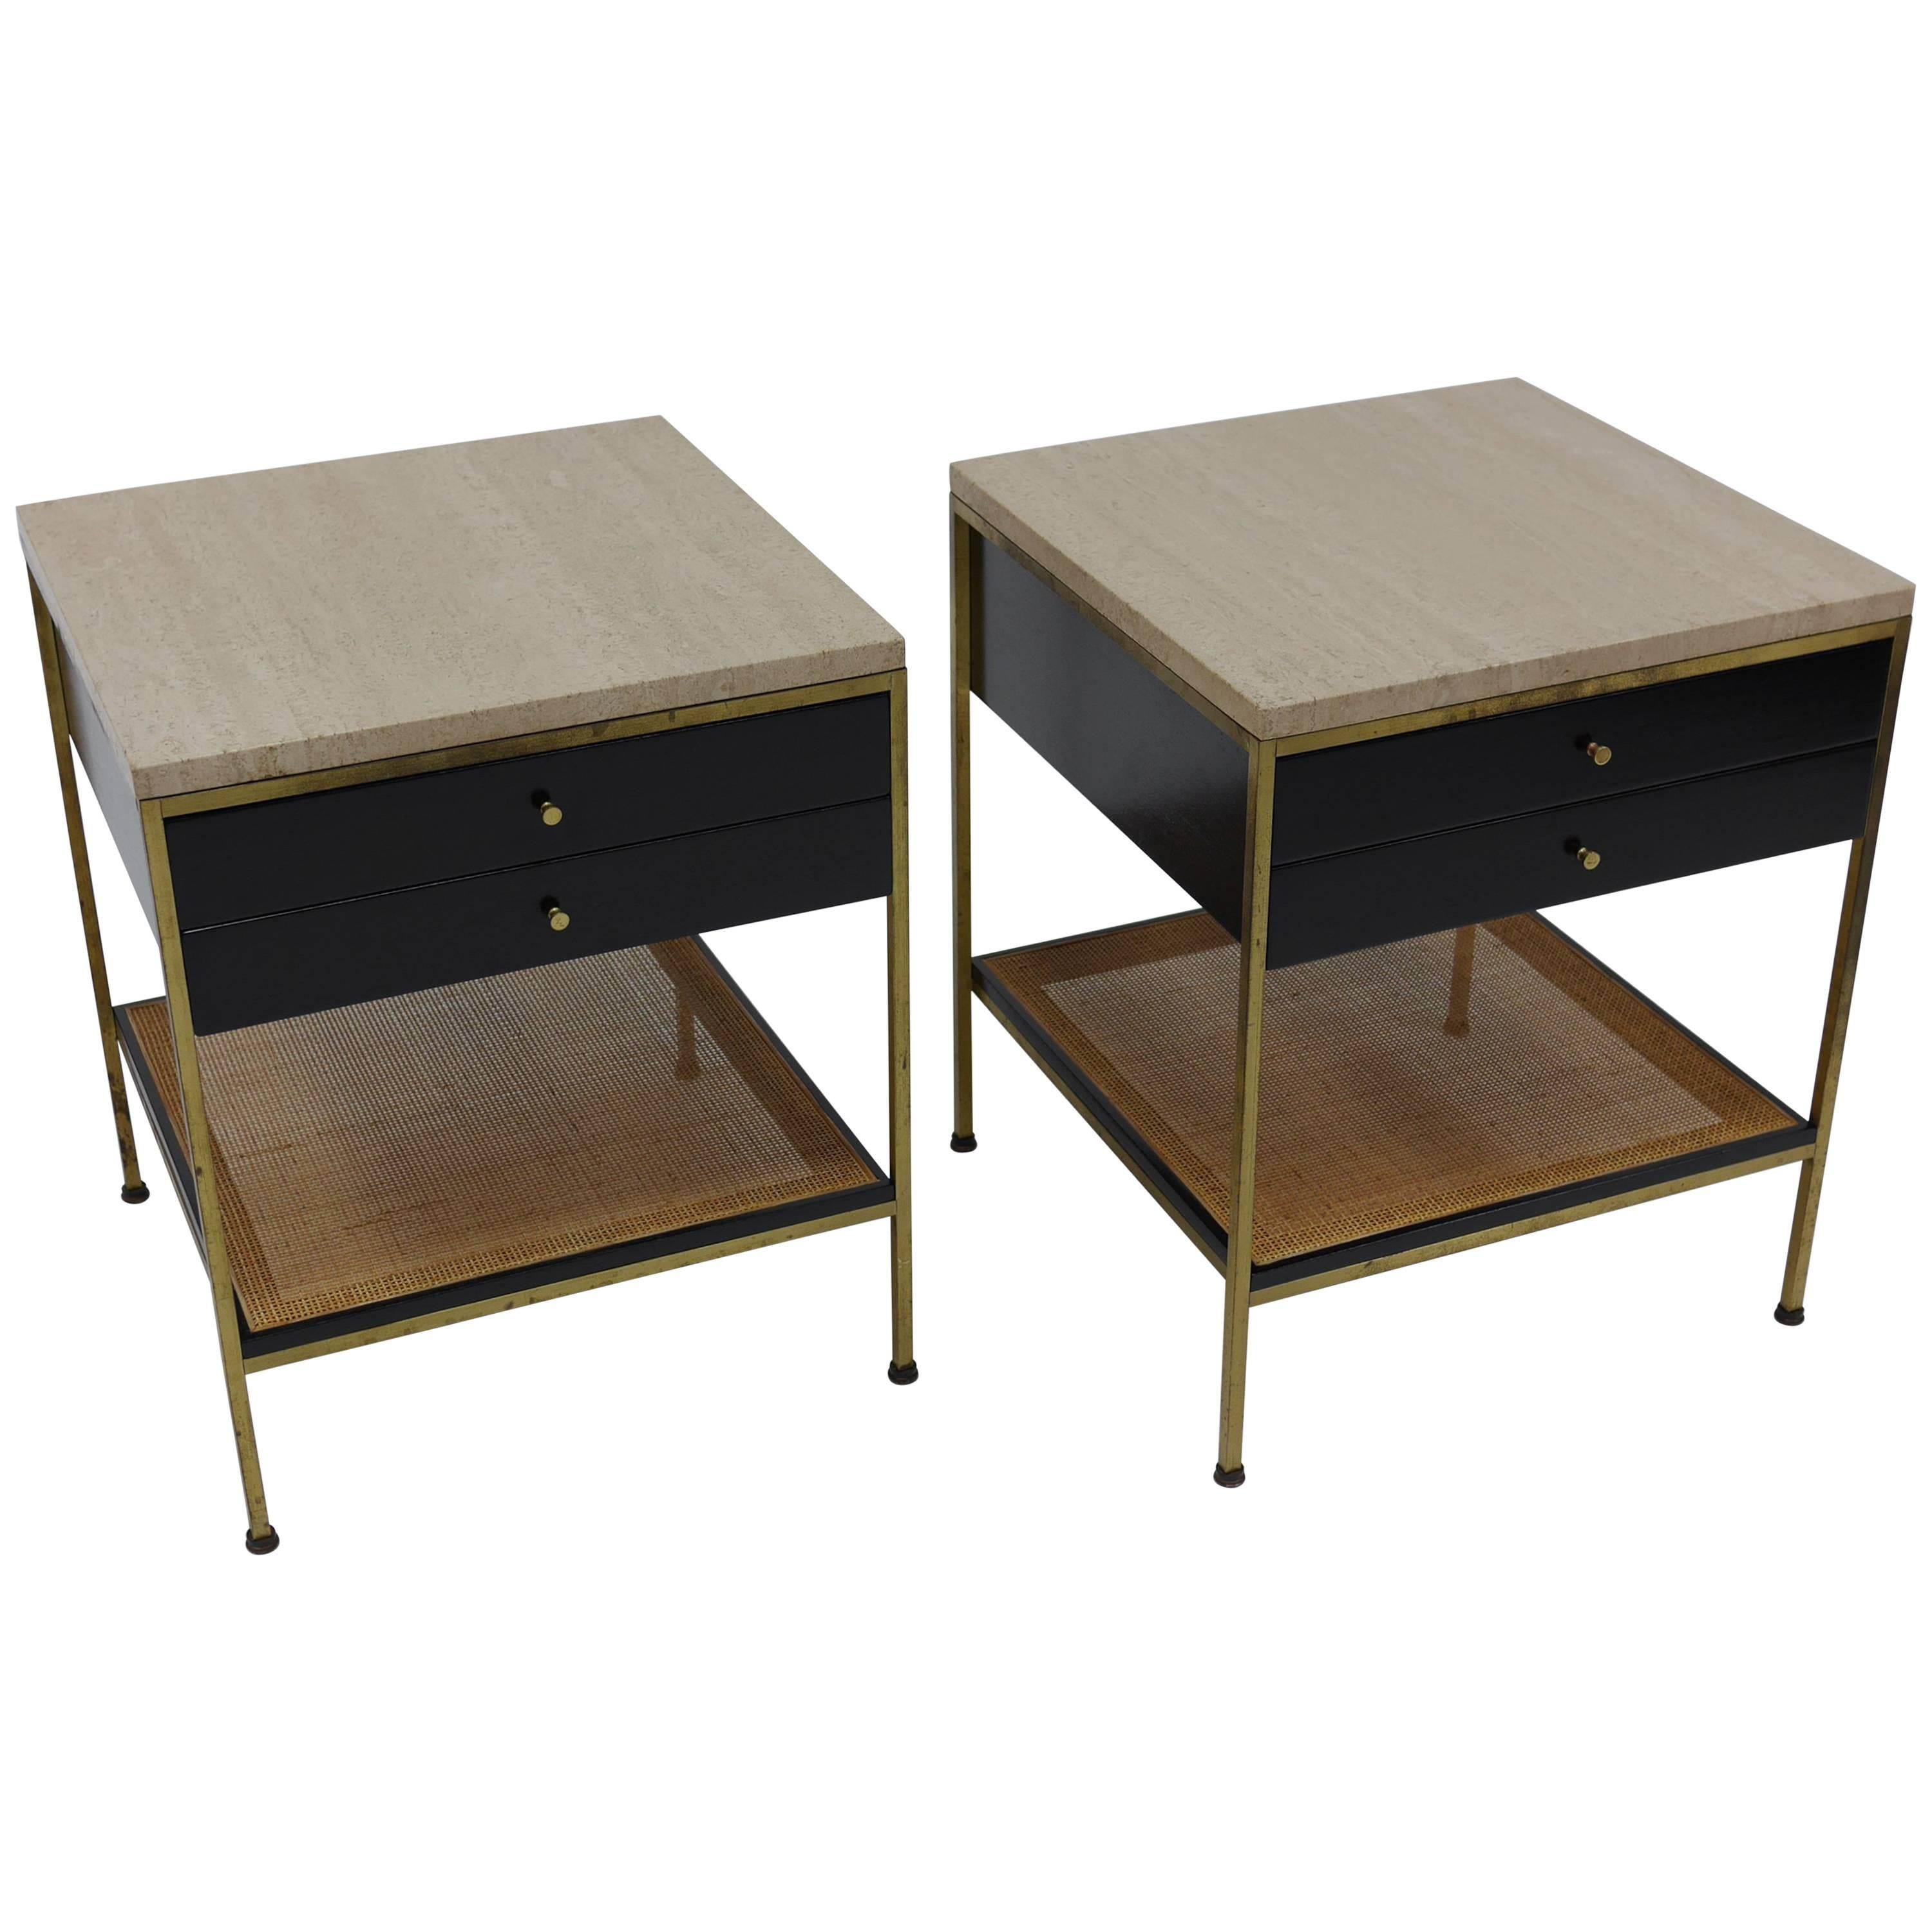 Pair of Paul McCobb Irwin Collection Brass Nightstands with Travertine Tops